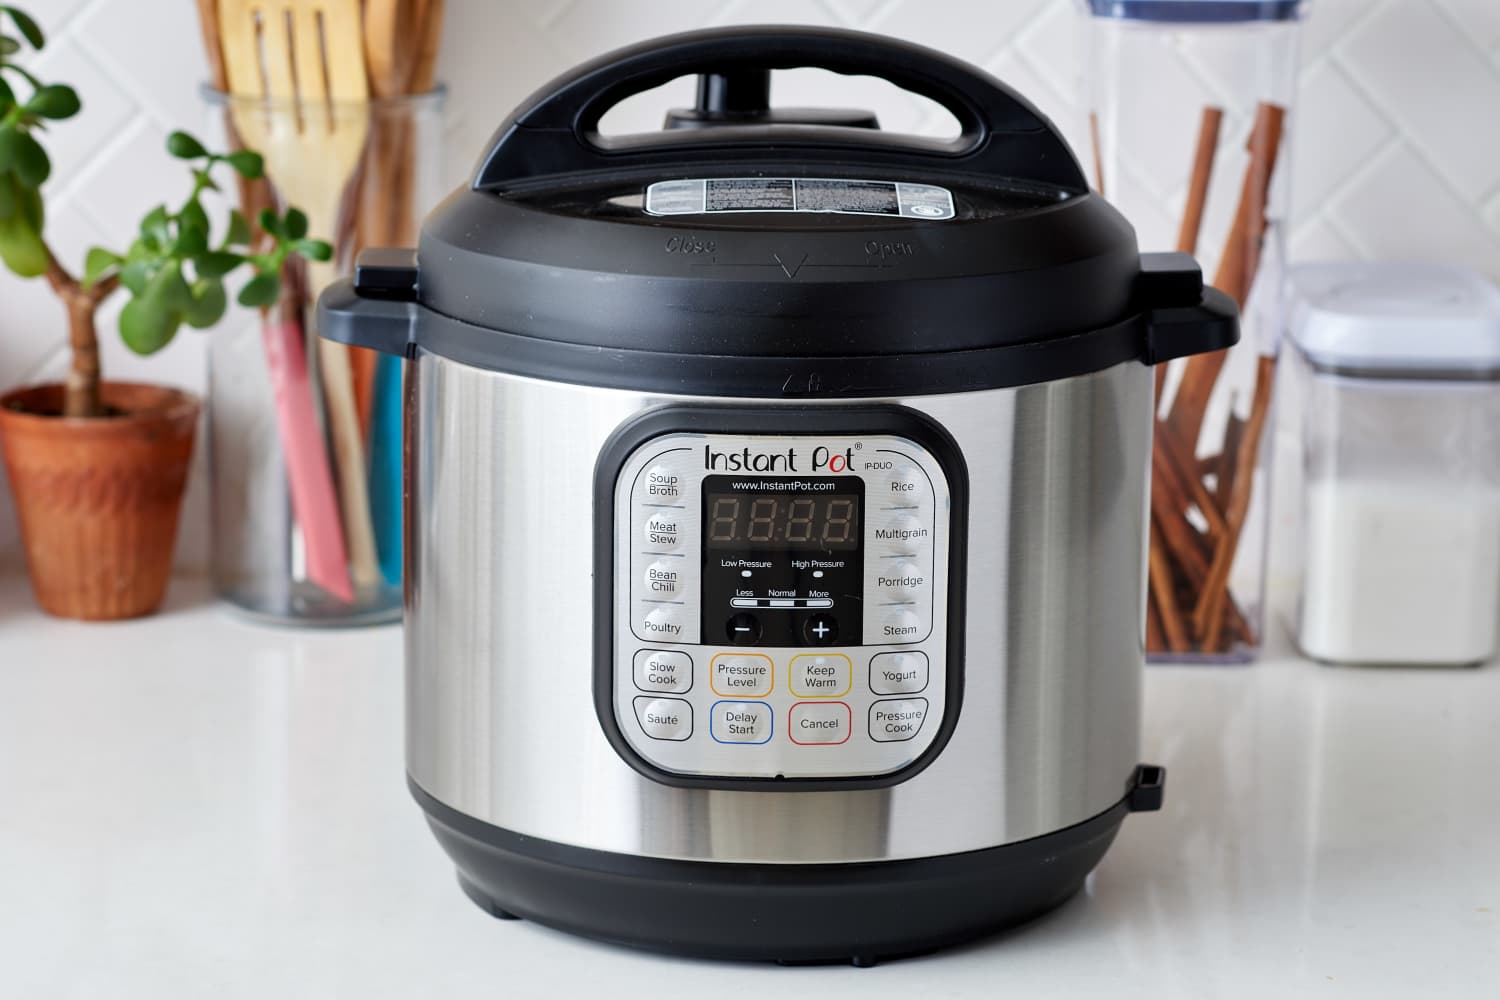 What's the Difference Between a Pressure Cooker and an Instant Pot